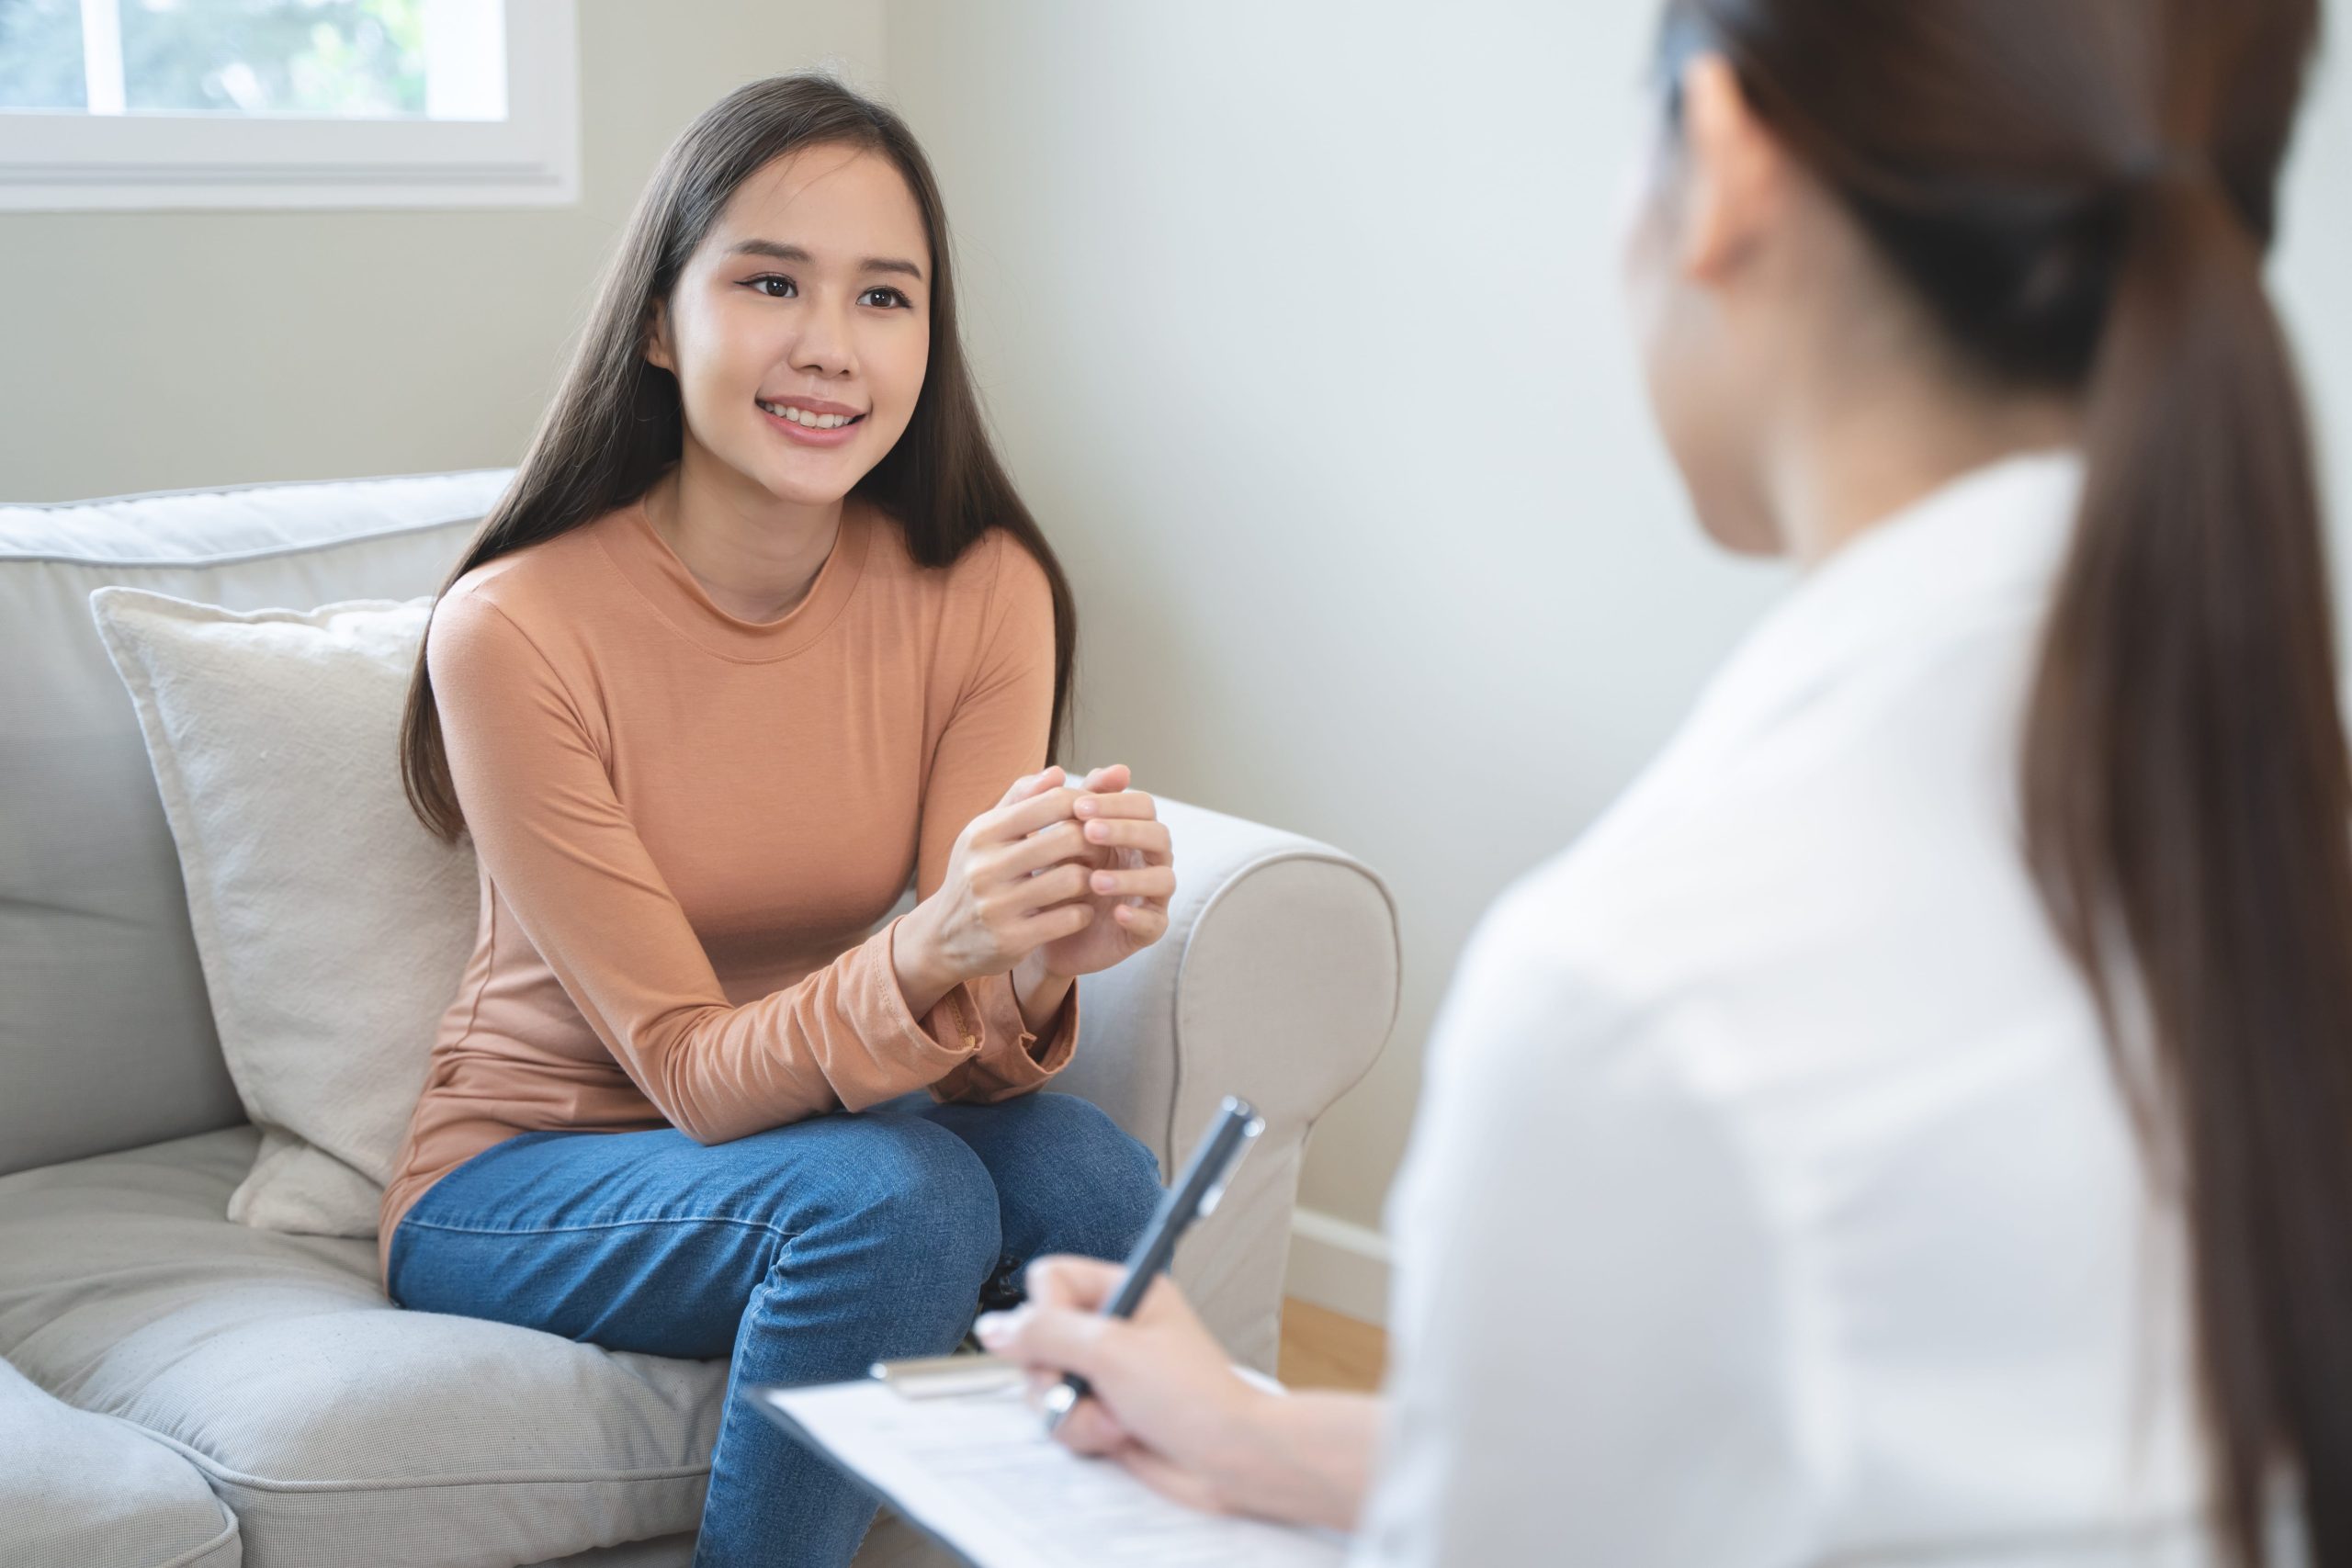 How do you find a therapist that is right for you?